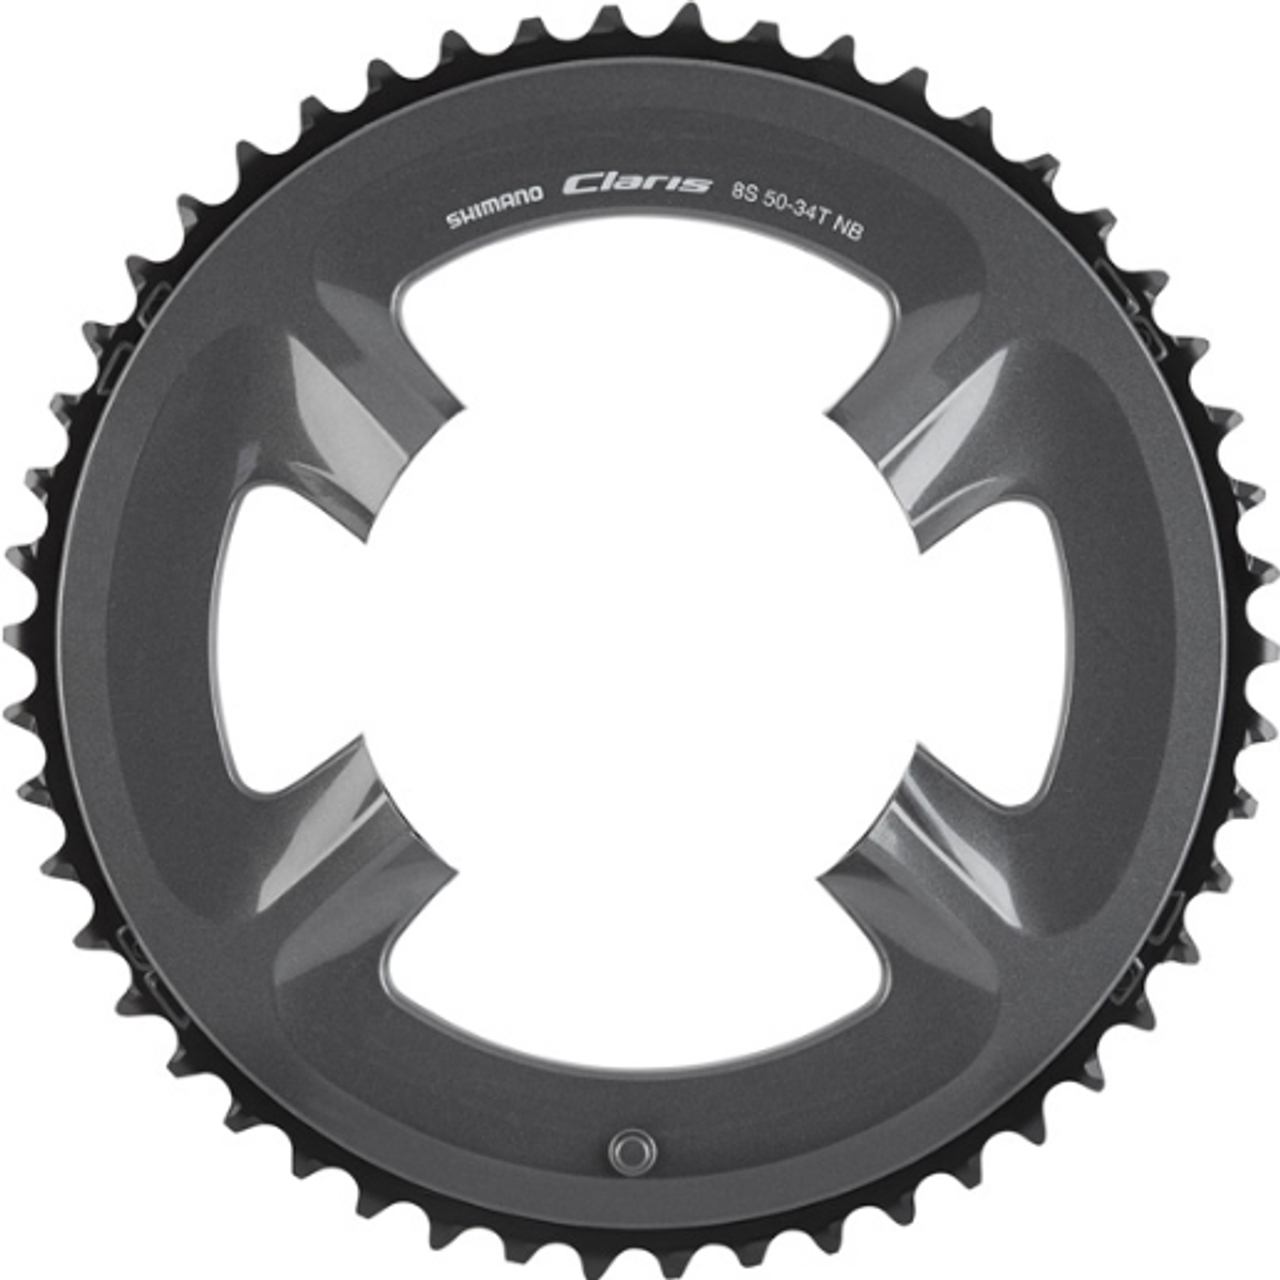 Shimano Claris FC-R2000 8 Speed Double Compact Chainring